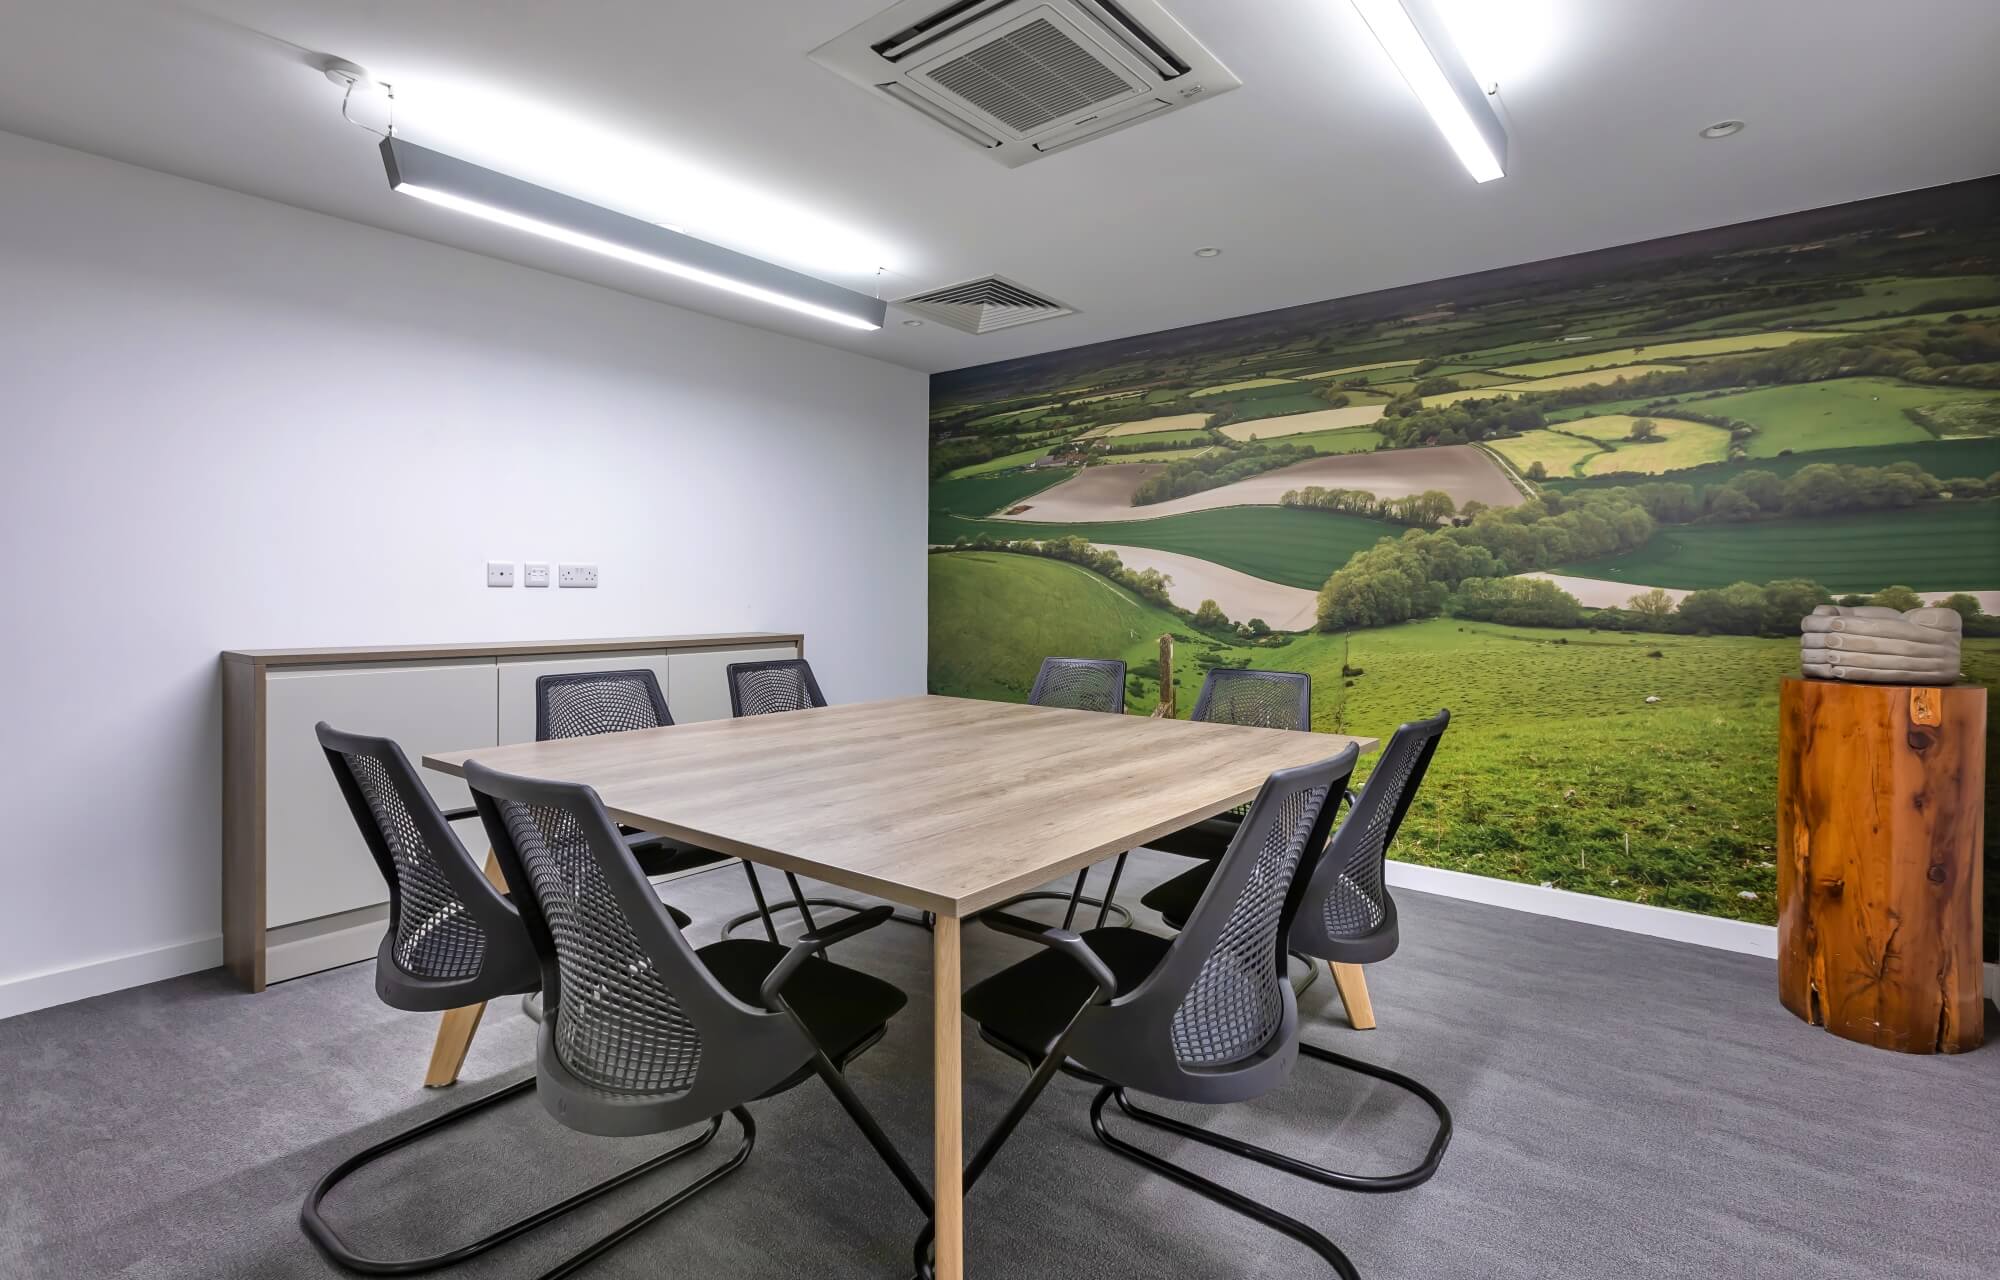 Meeting Room Design Chichester